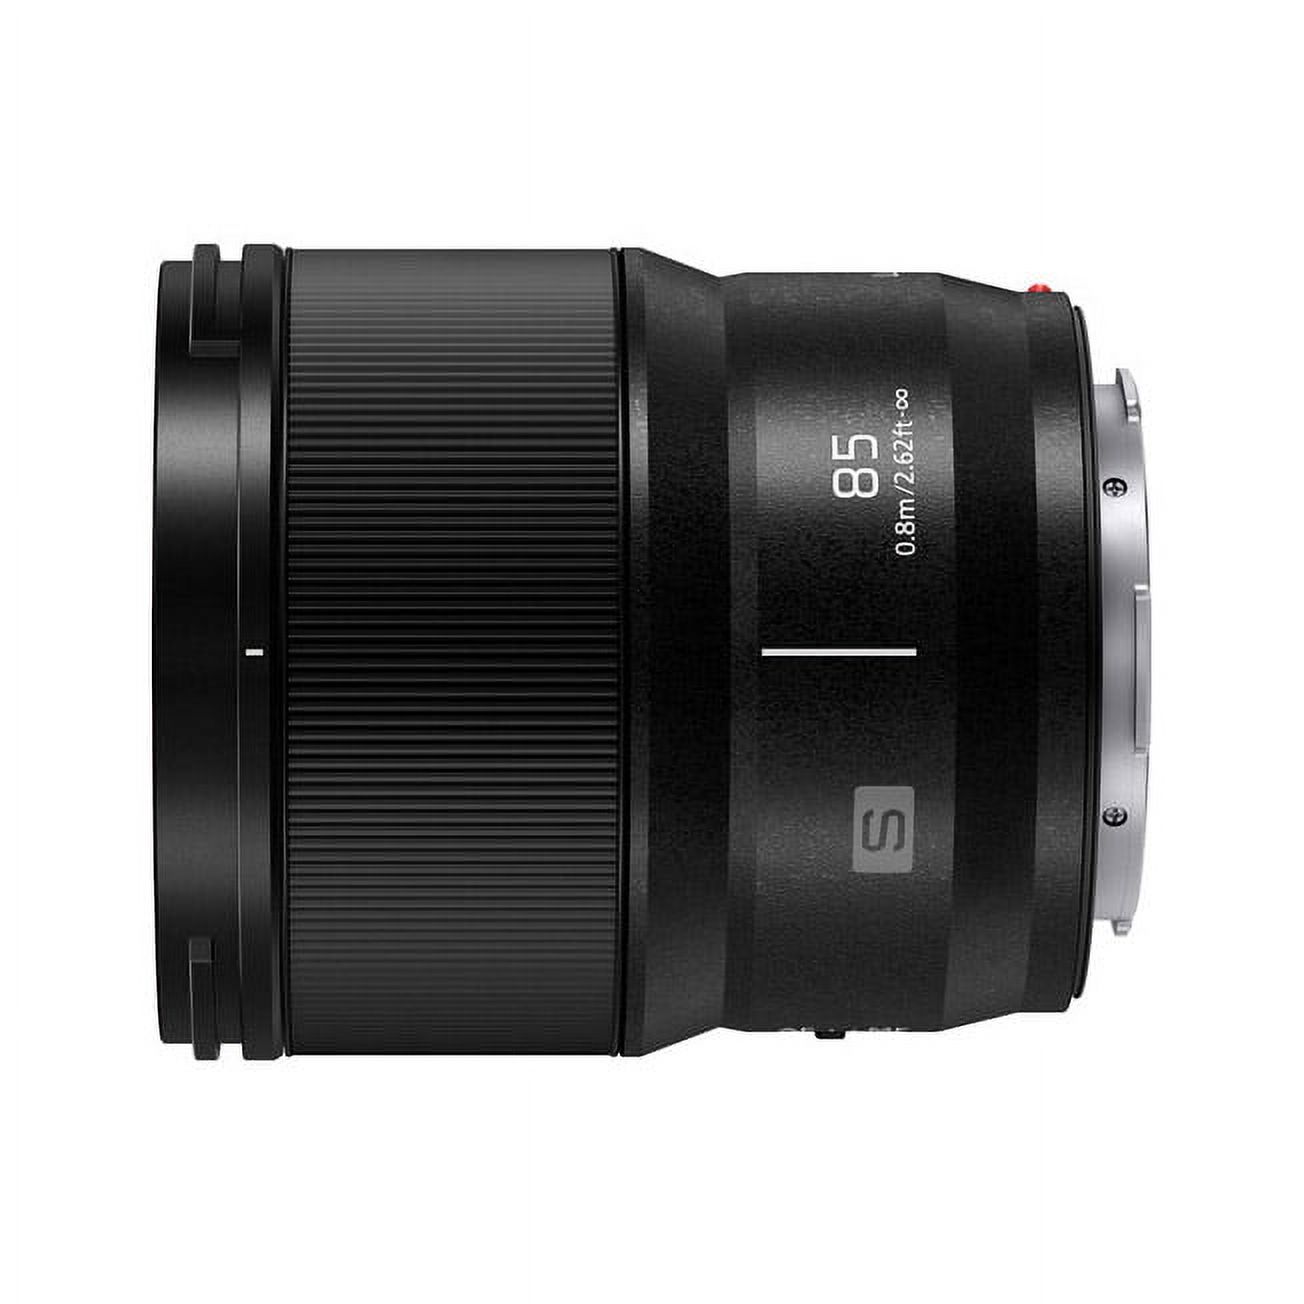 Panasonic LUMIX S 85mm F1.8 Lens for L-Mount Mirrorless Full Frame Cameras S-S85 - image 3 of 5